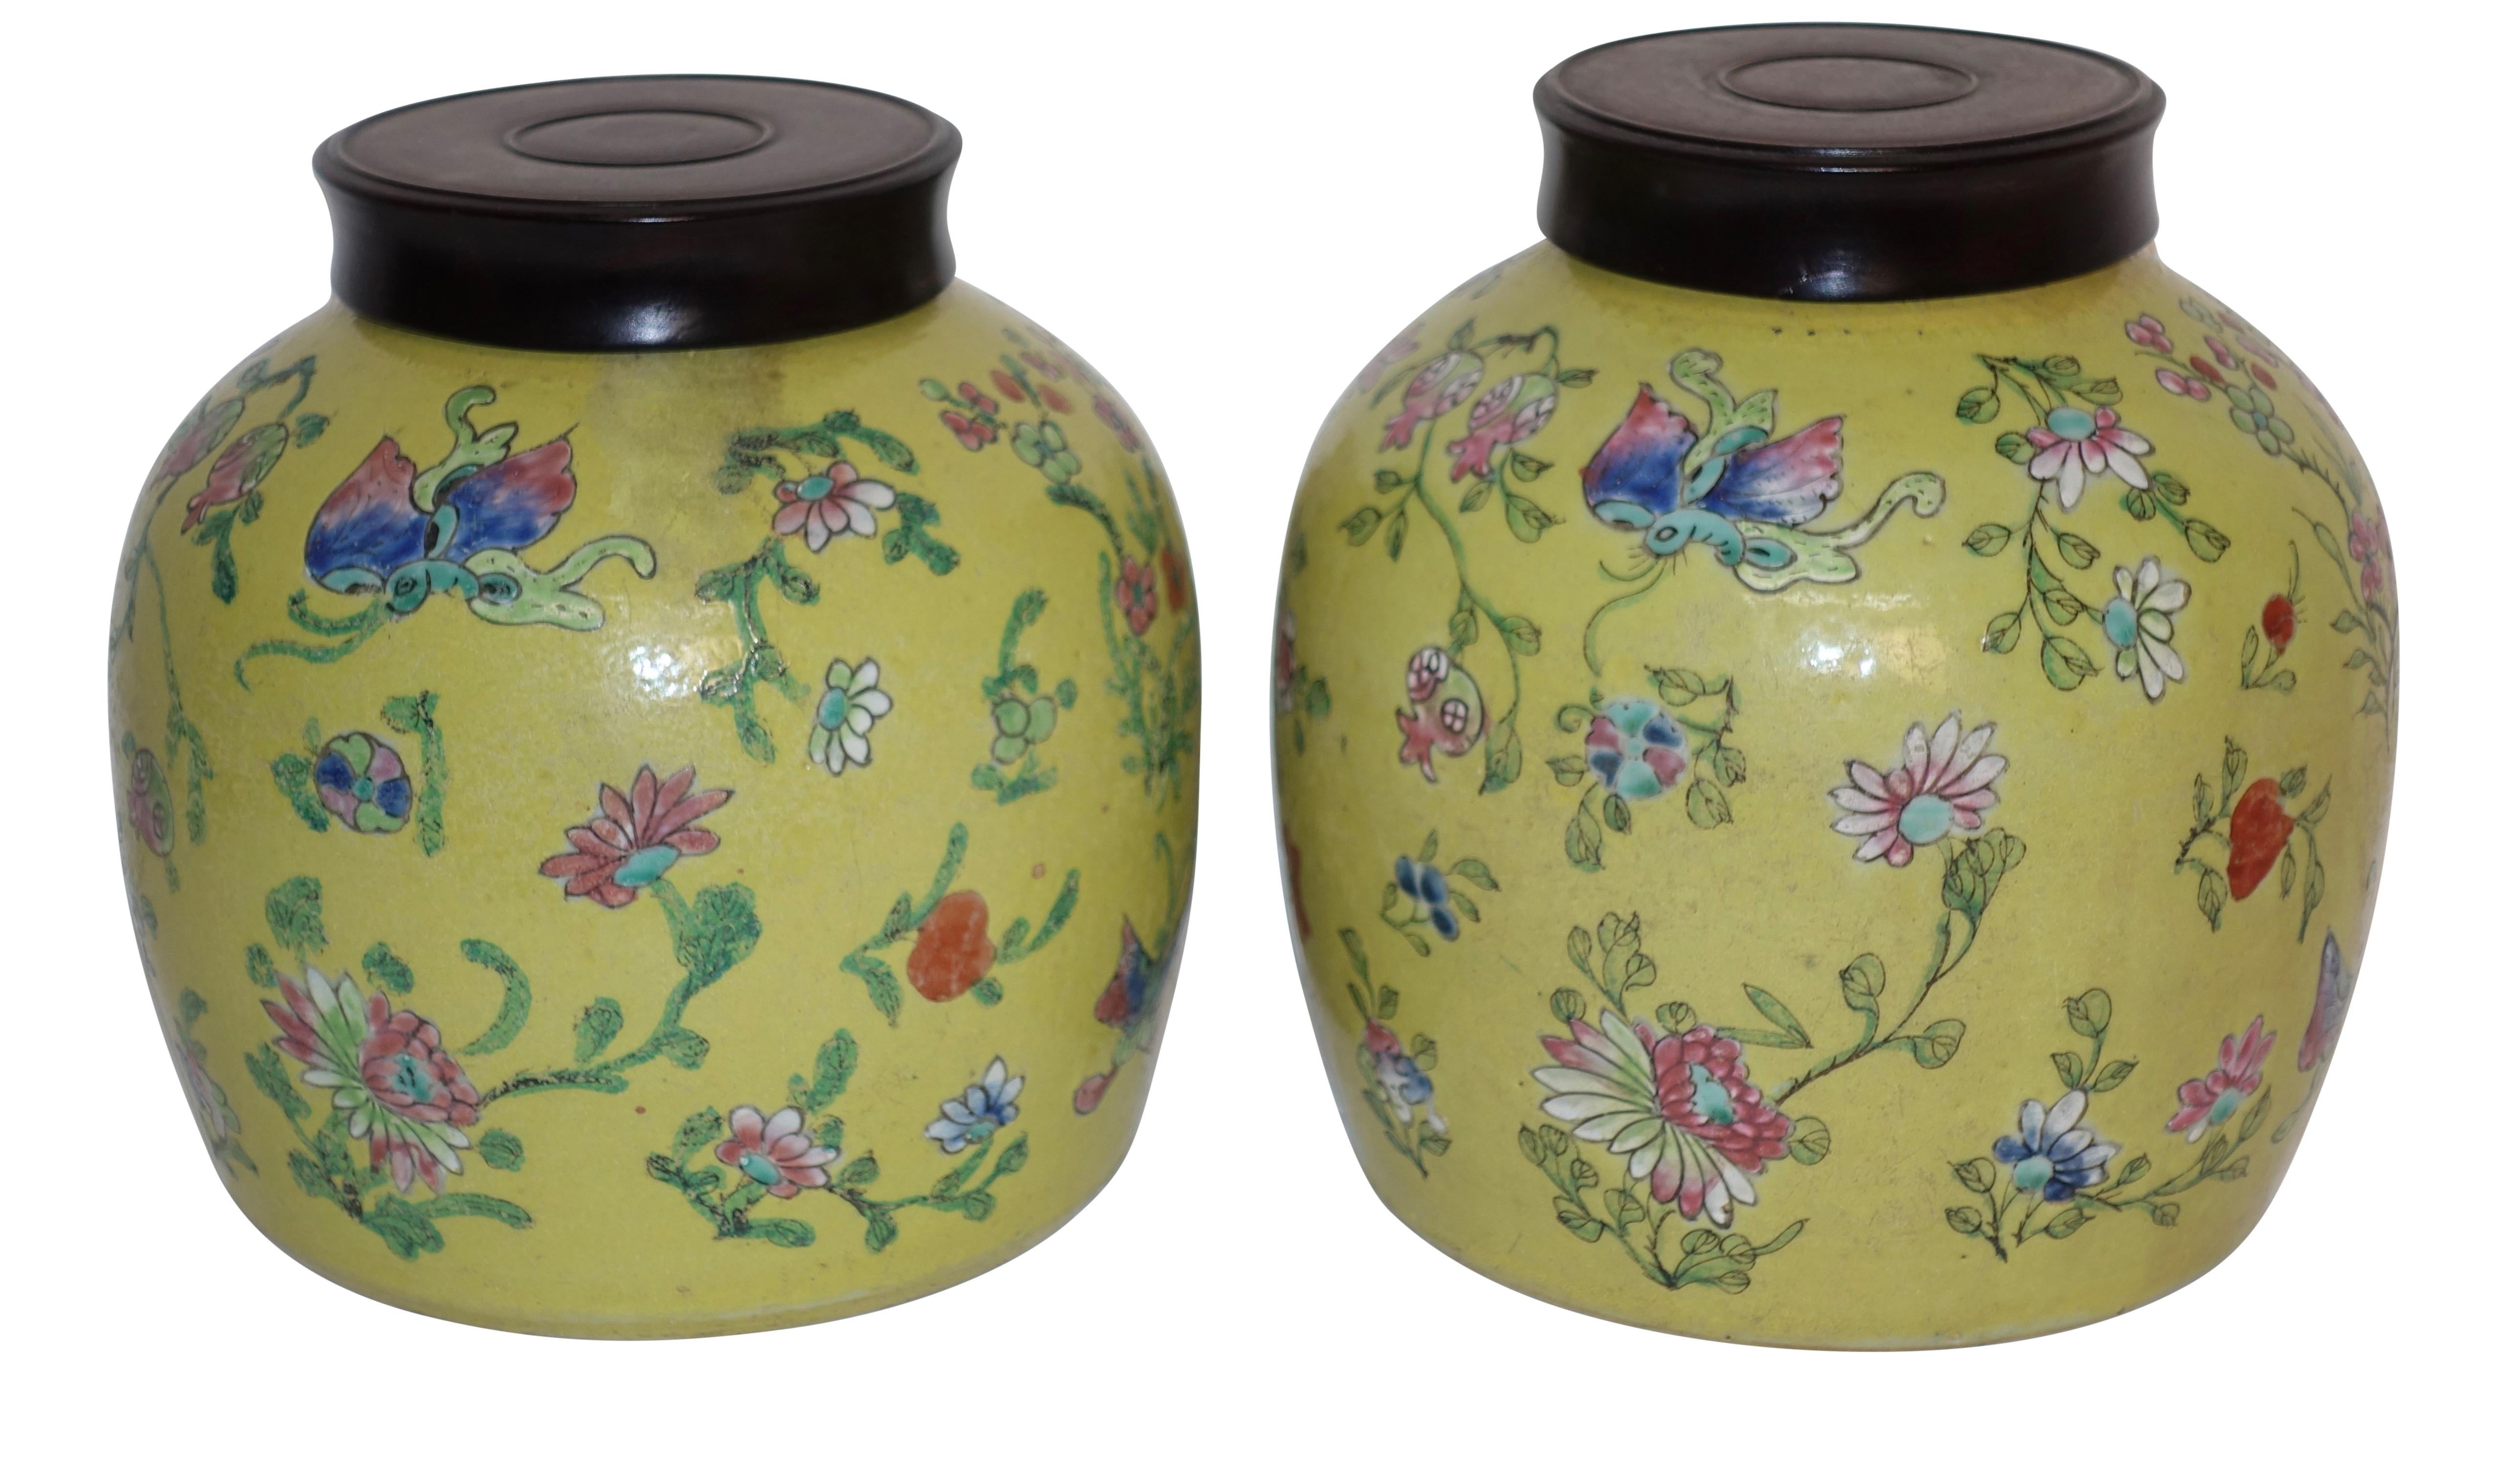 Ceramic Pair of Mustard Yellow Jars with Wooden Lids, Chinese, Early 20th Century